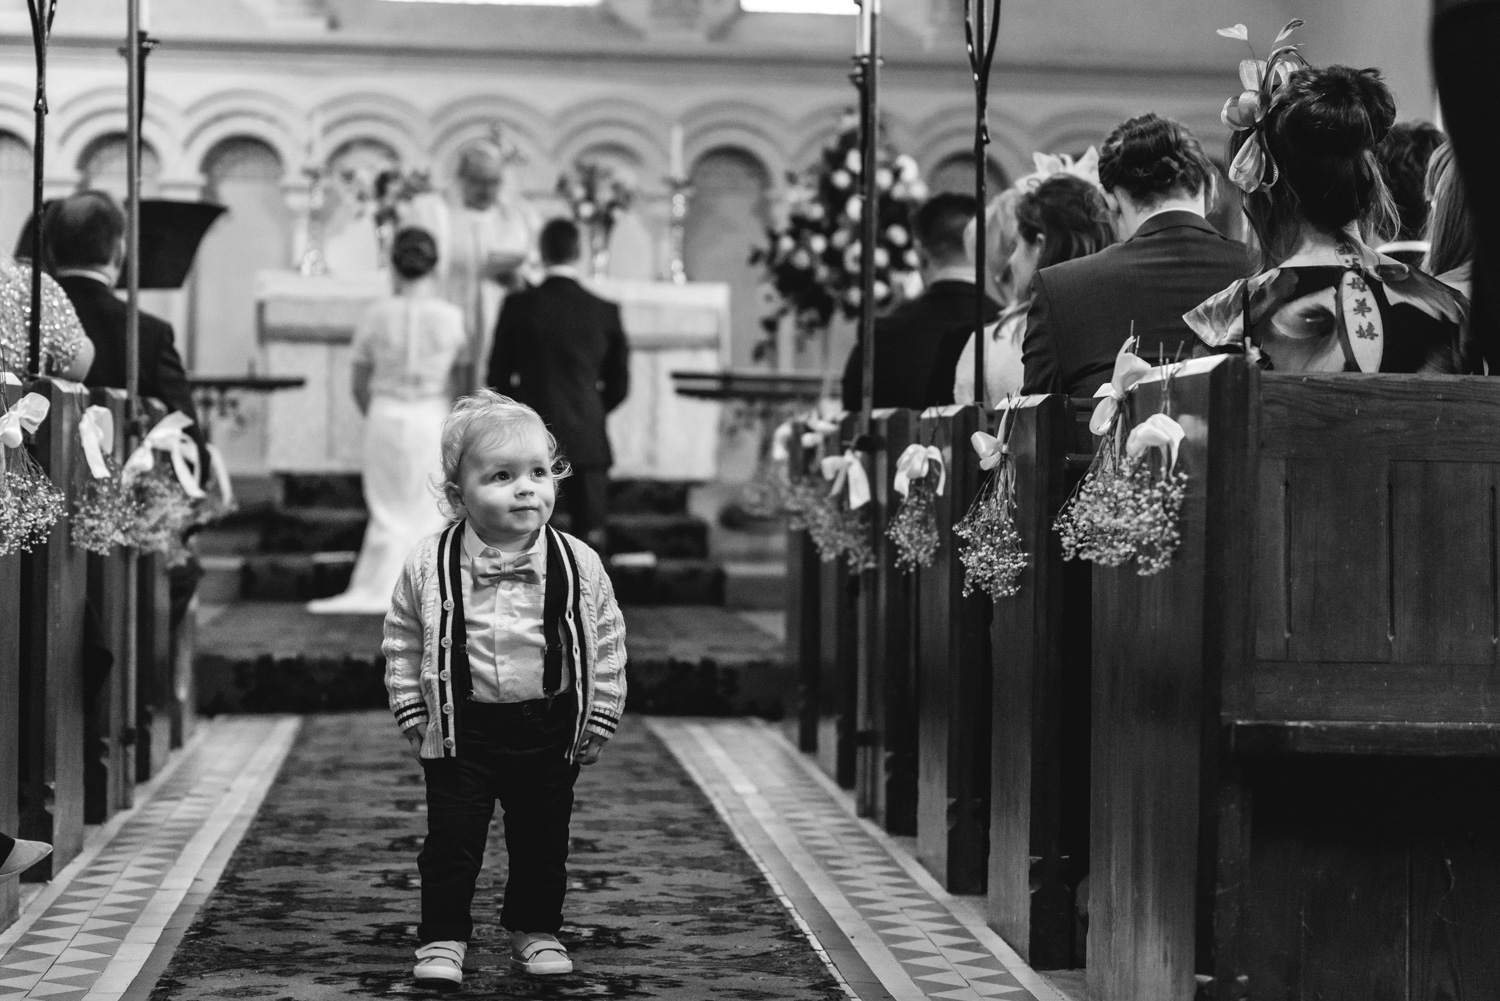 Toddler in church aisle during wedding